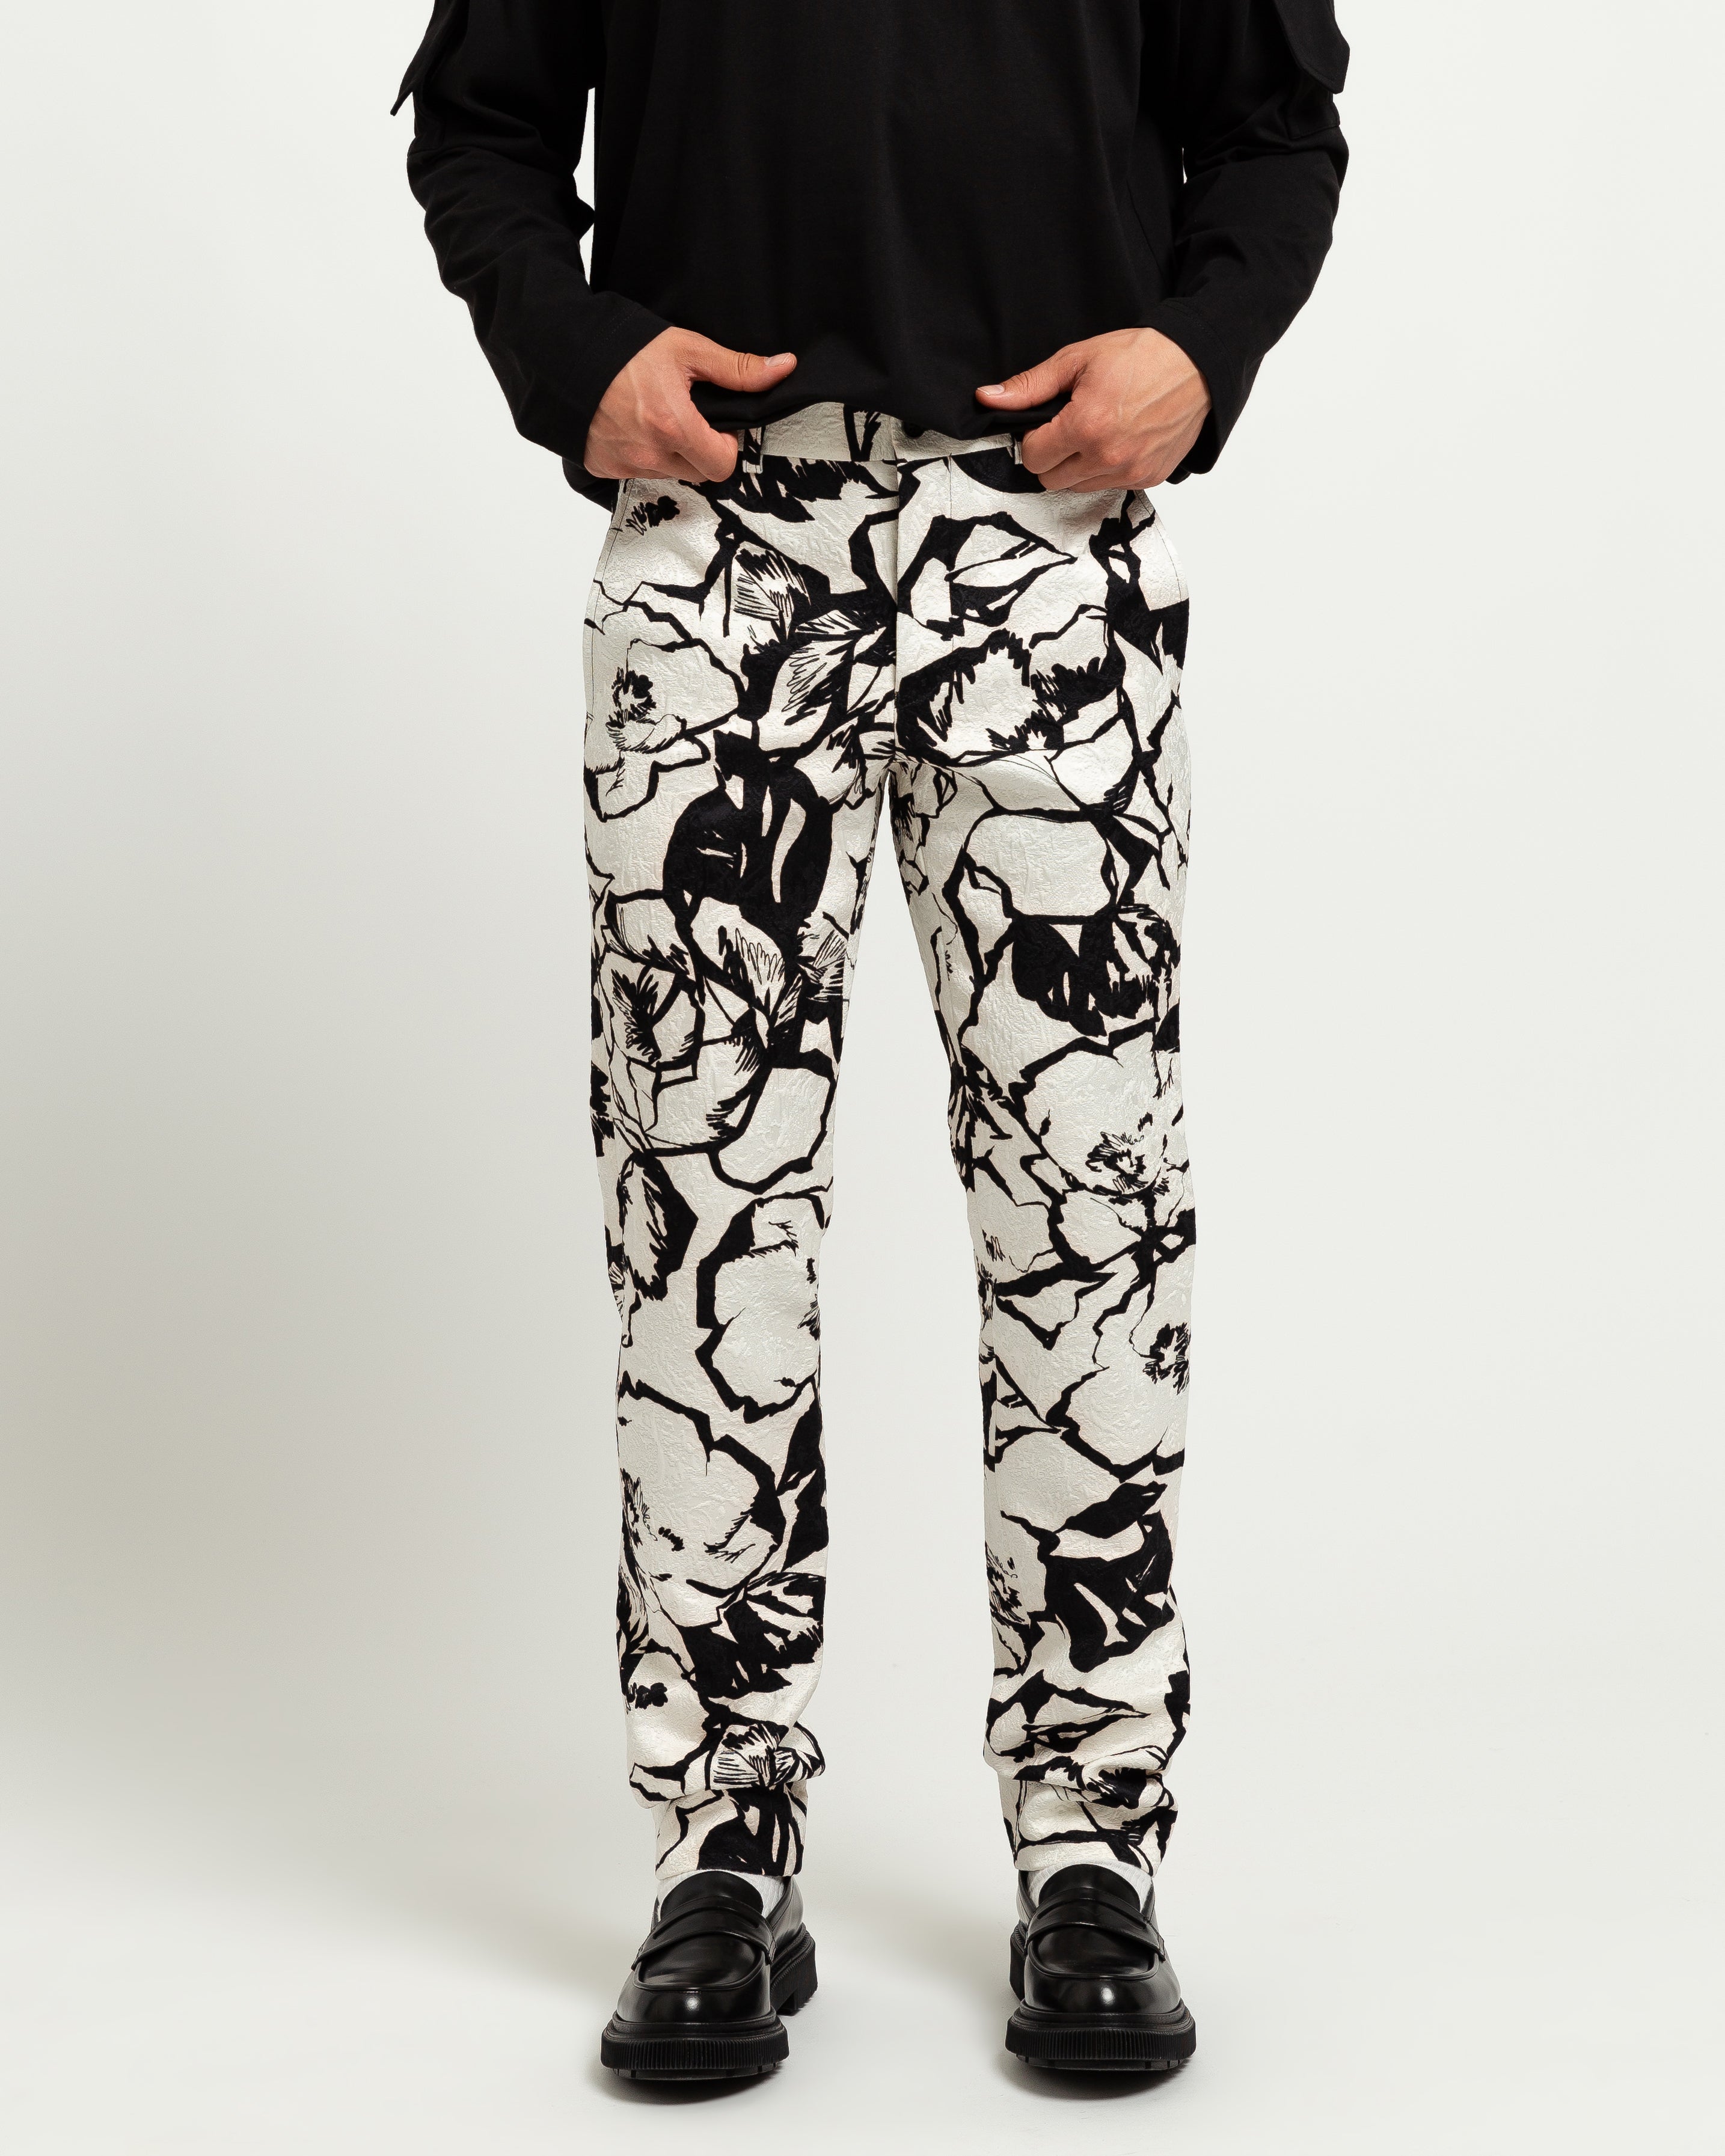 Pants in White/Floral